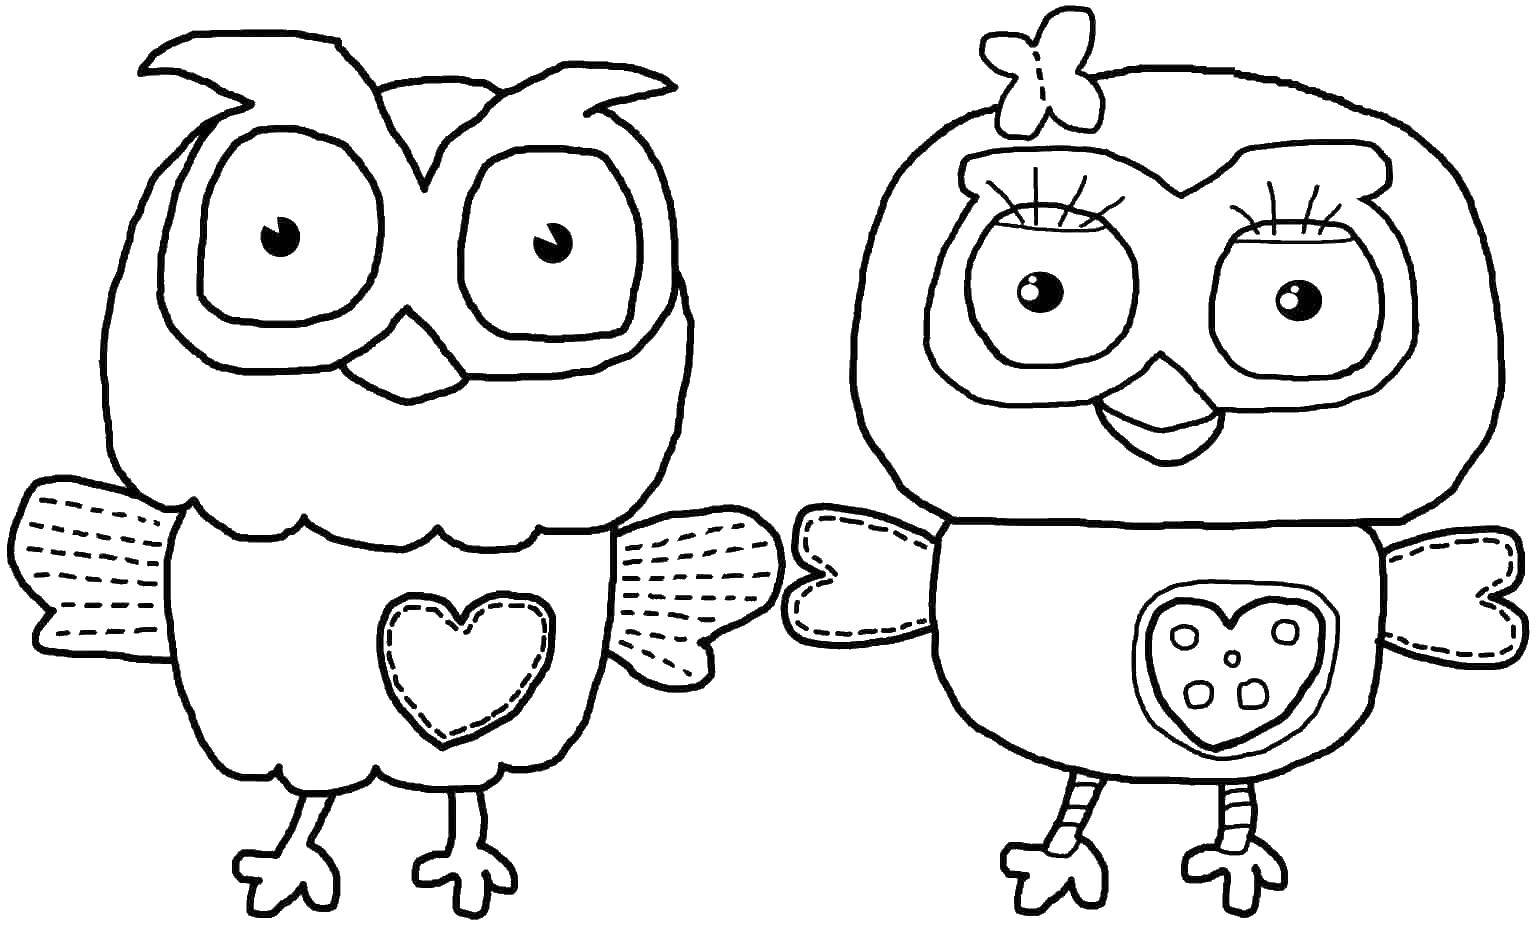 Coloring Owls toys. Category toy. Tags:  owl toy bird.